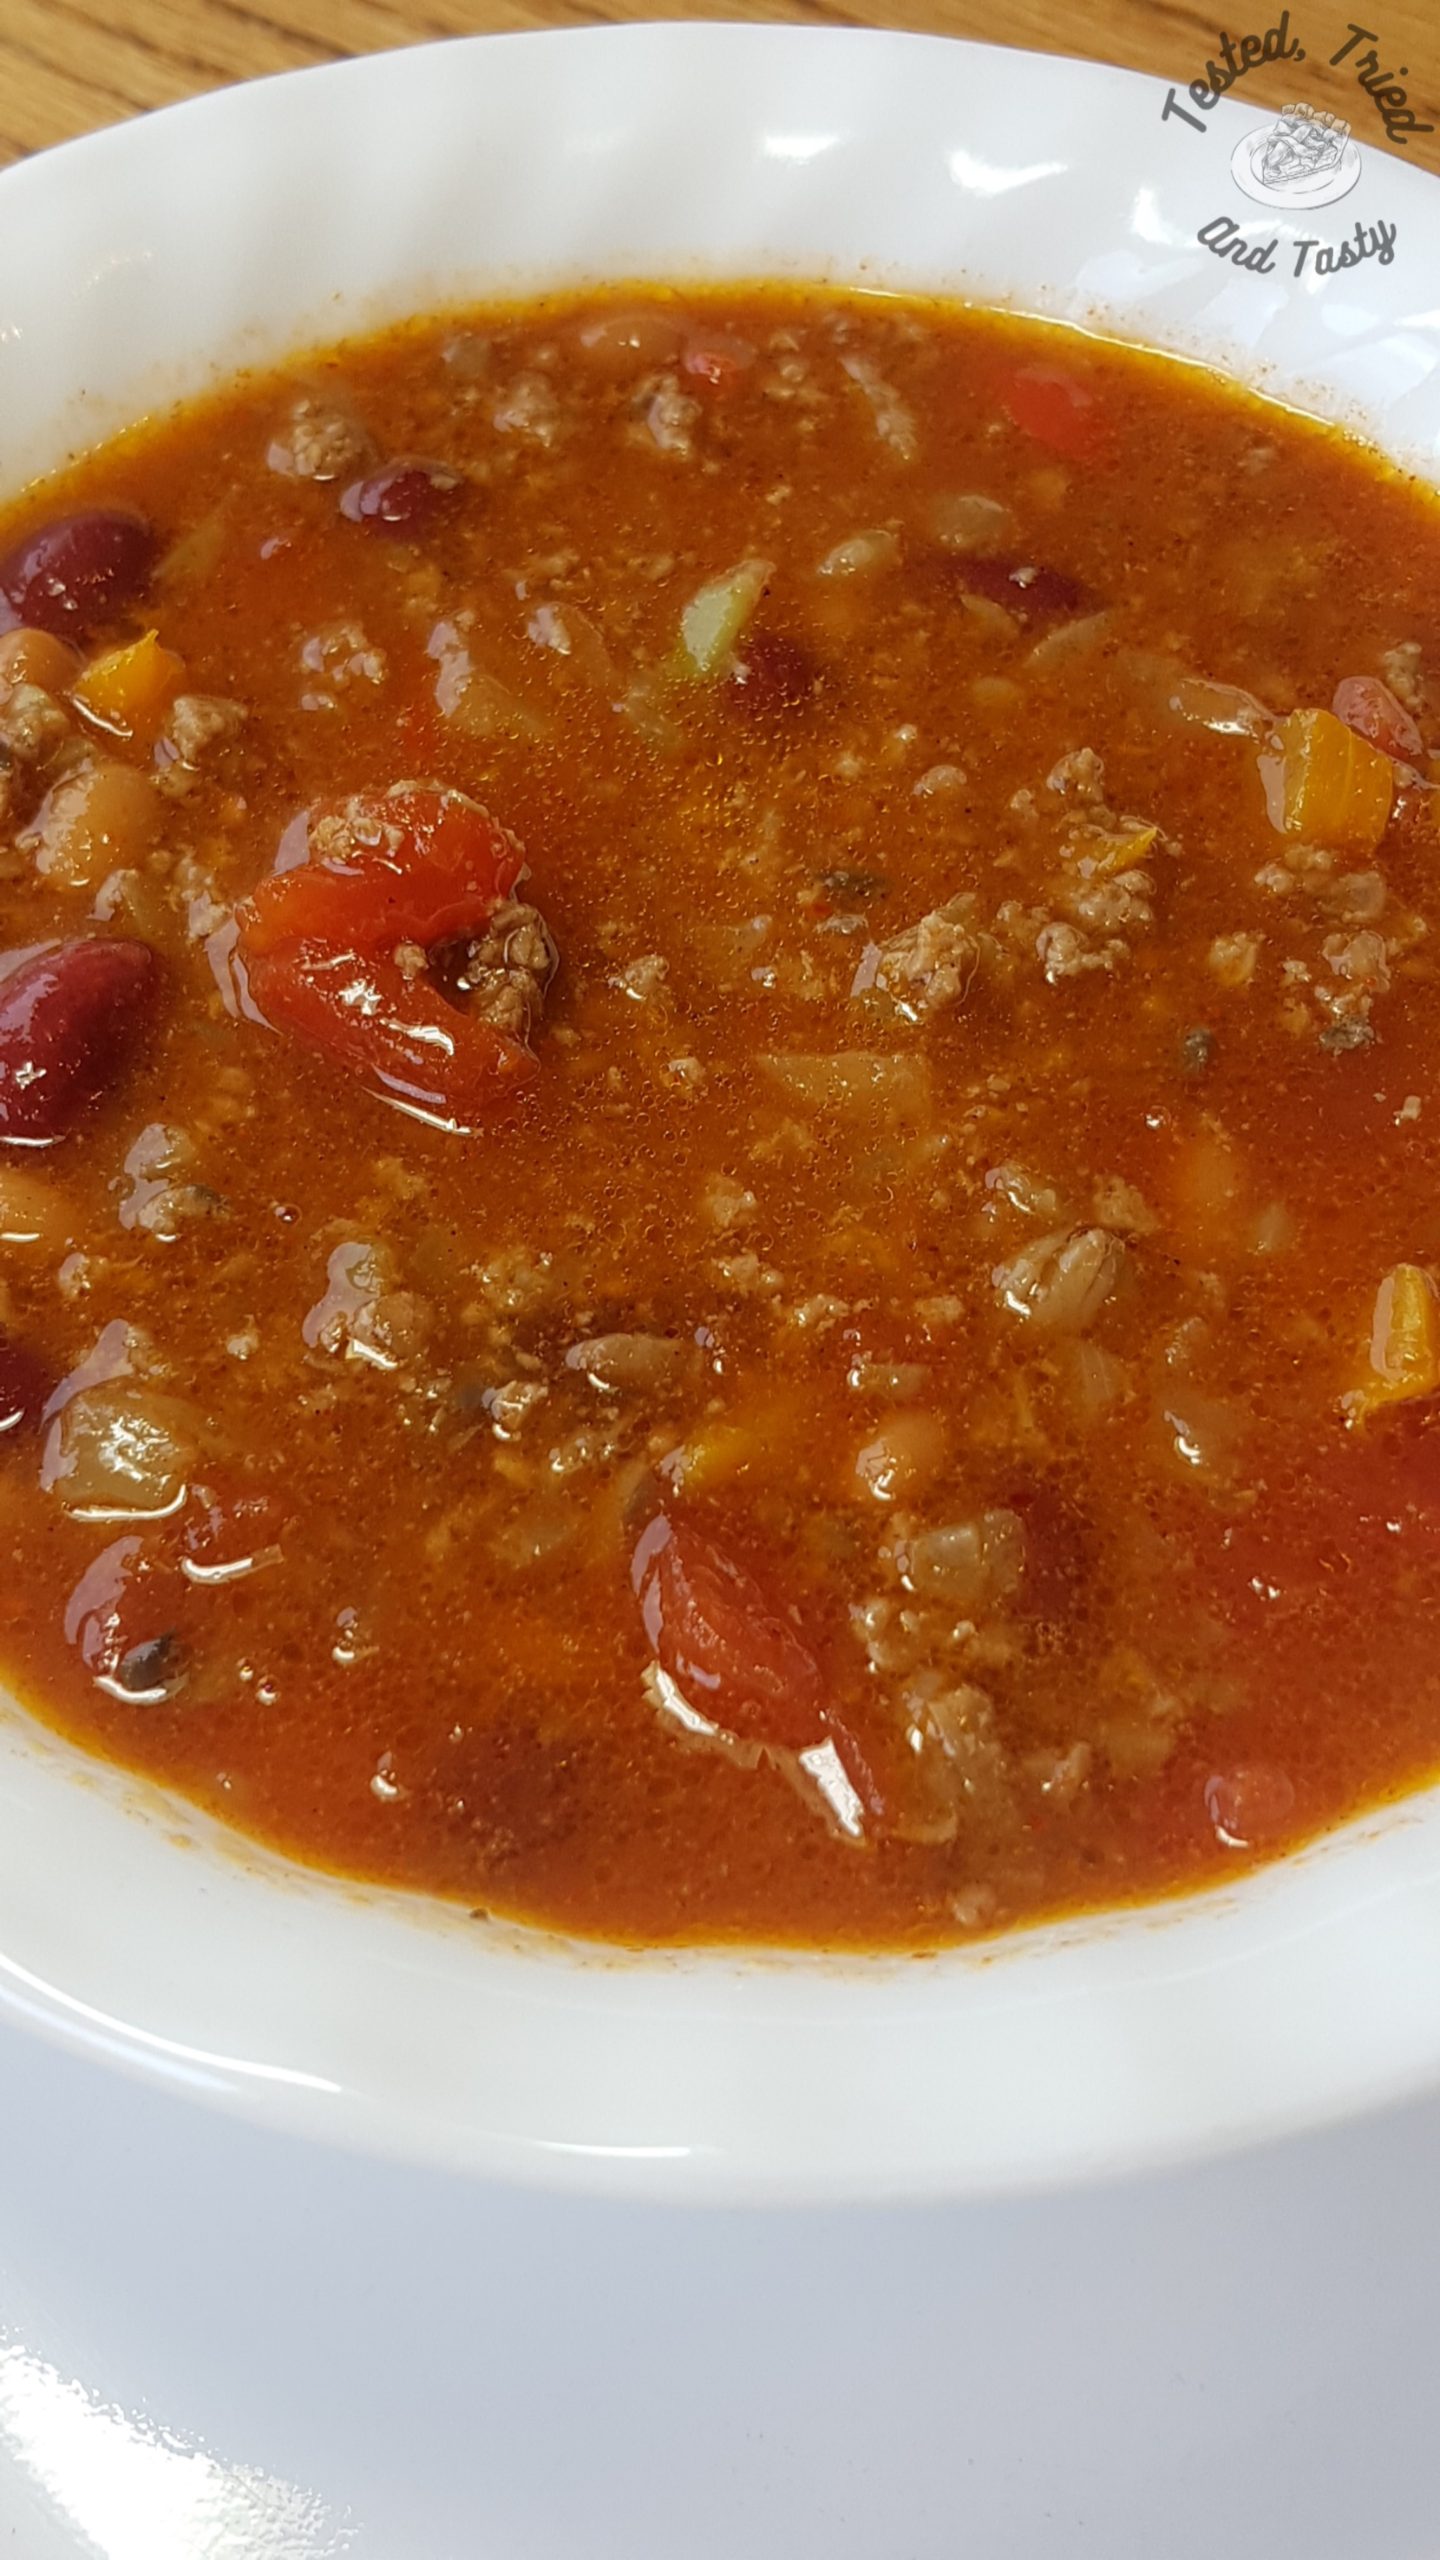 Classic Homemade Chili Recipe - Tested, Tried and Tasty Food